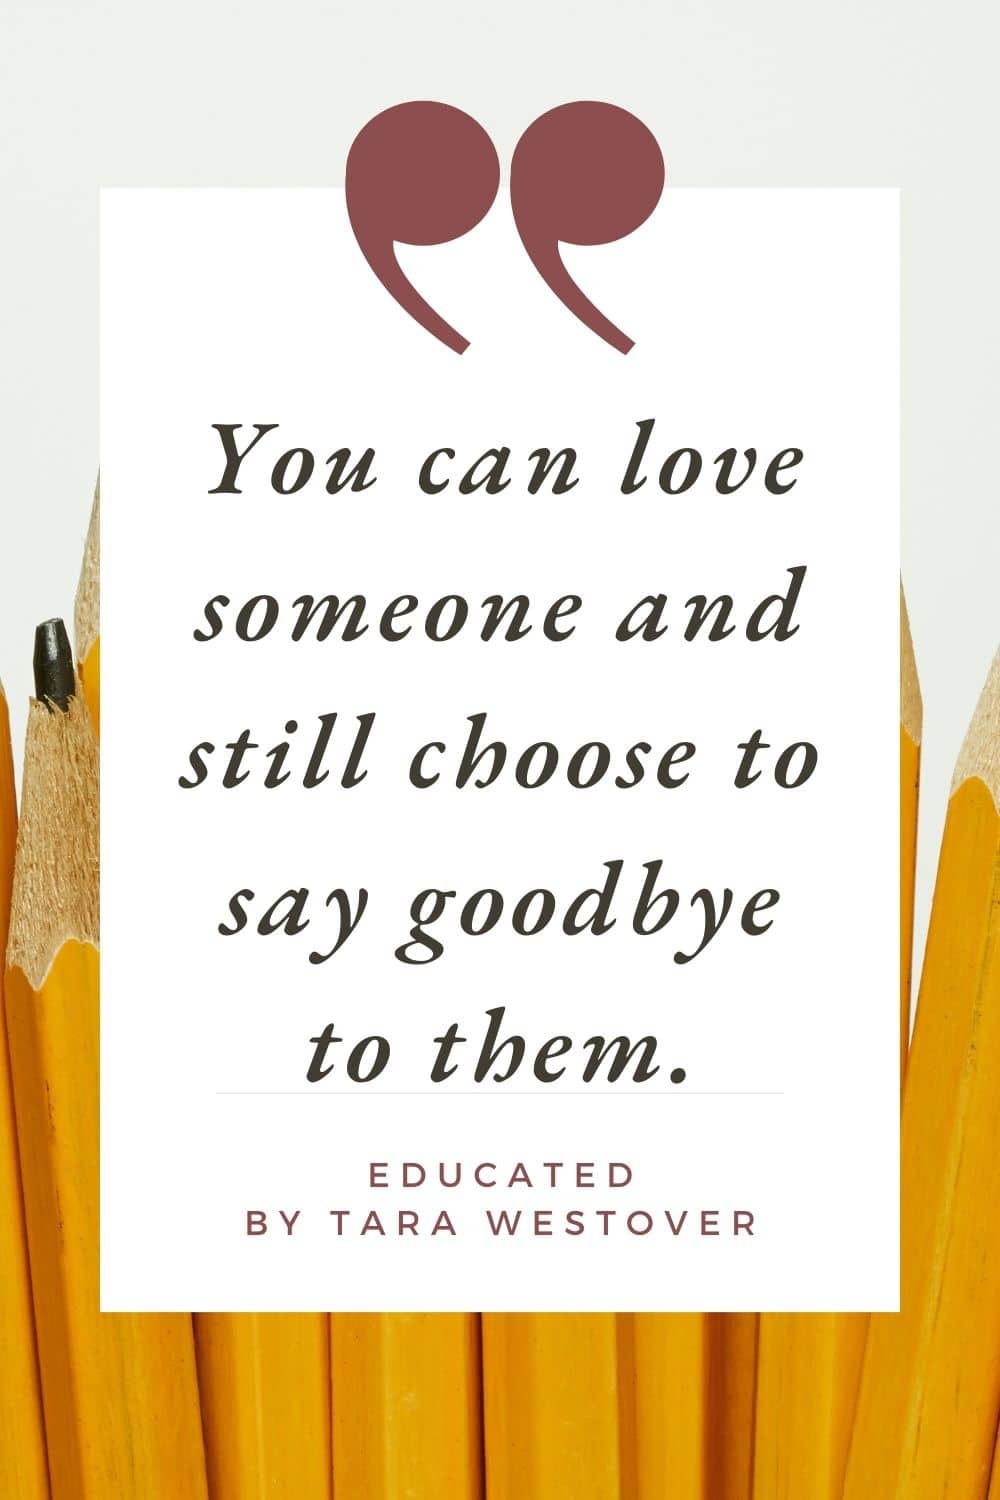 you can love someone and still choose to say goodbye to them. educated by tara westover.